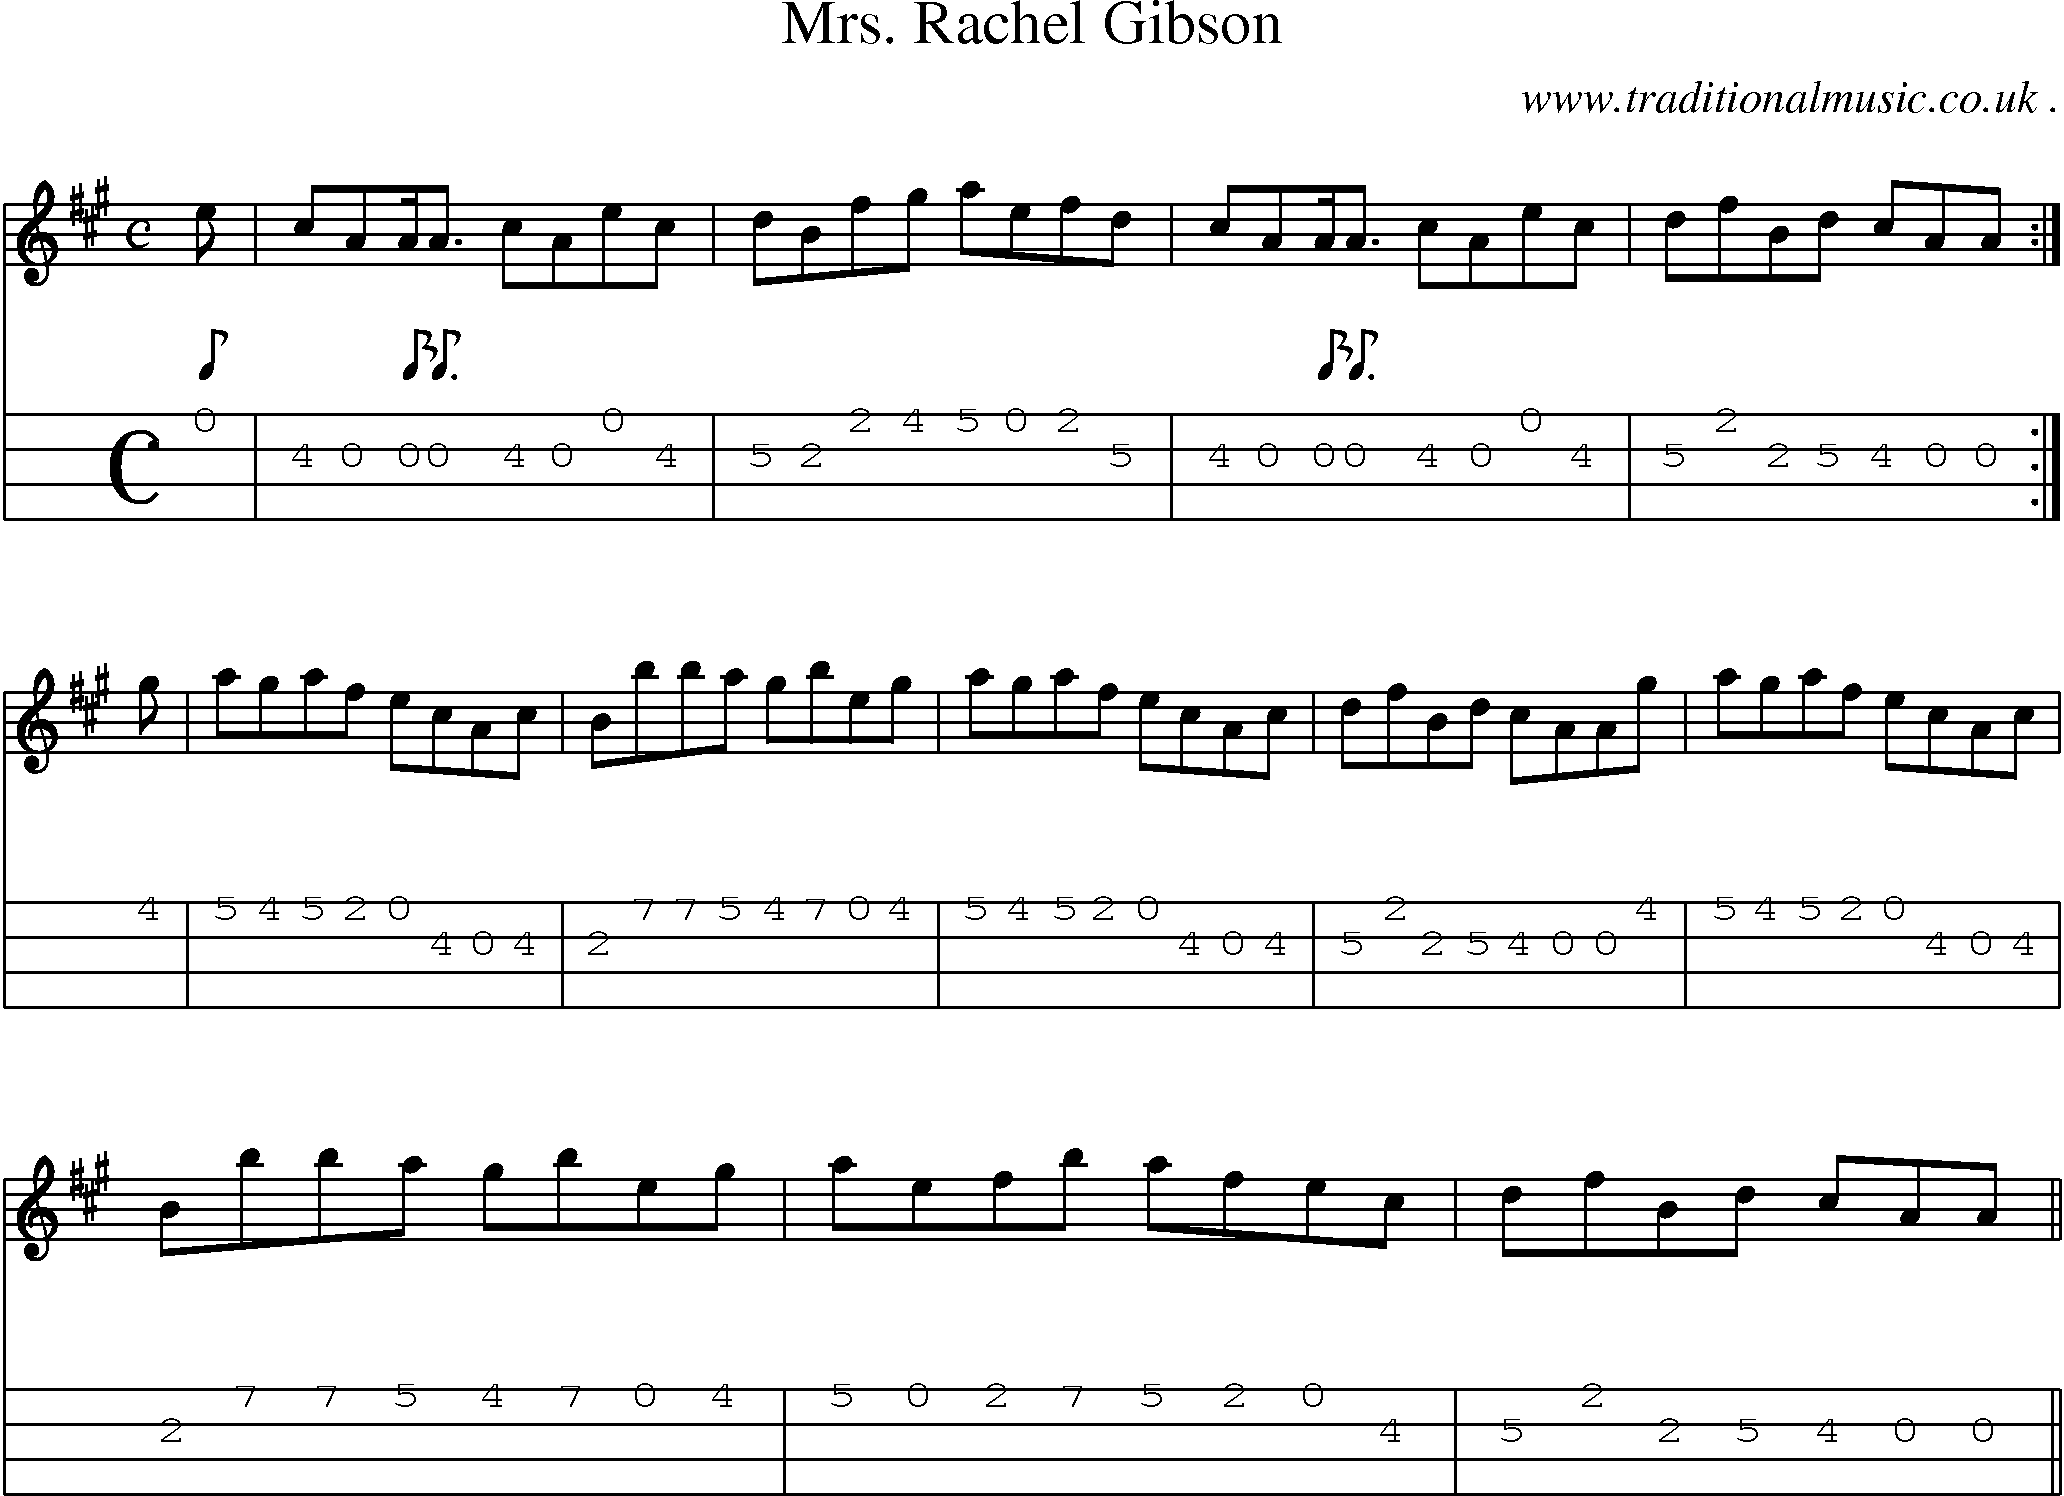 Sheet-music  score, Chords and Mandolin Tabs for Mrs Rachel Gibson